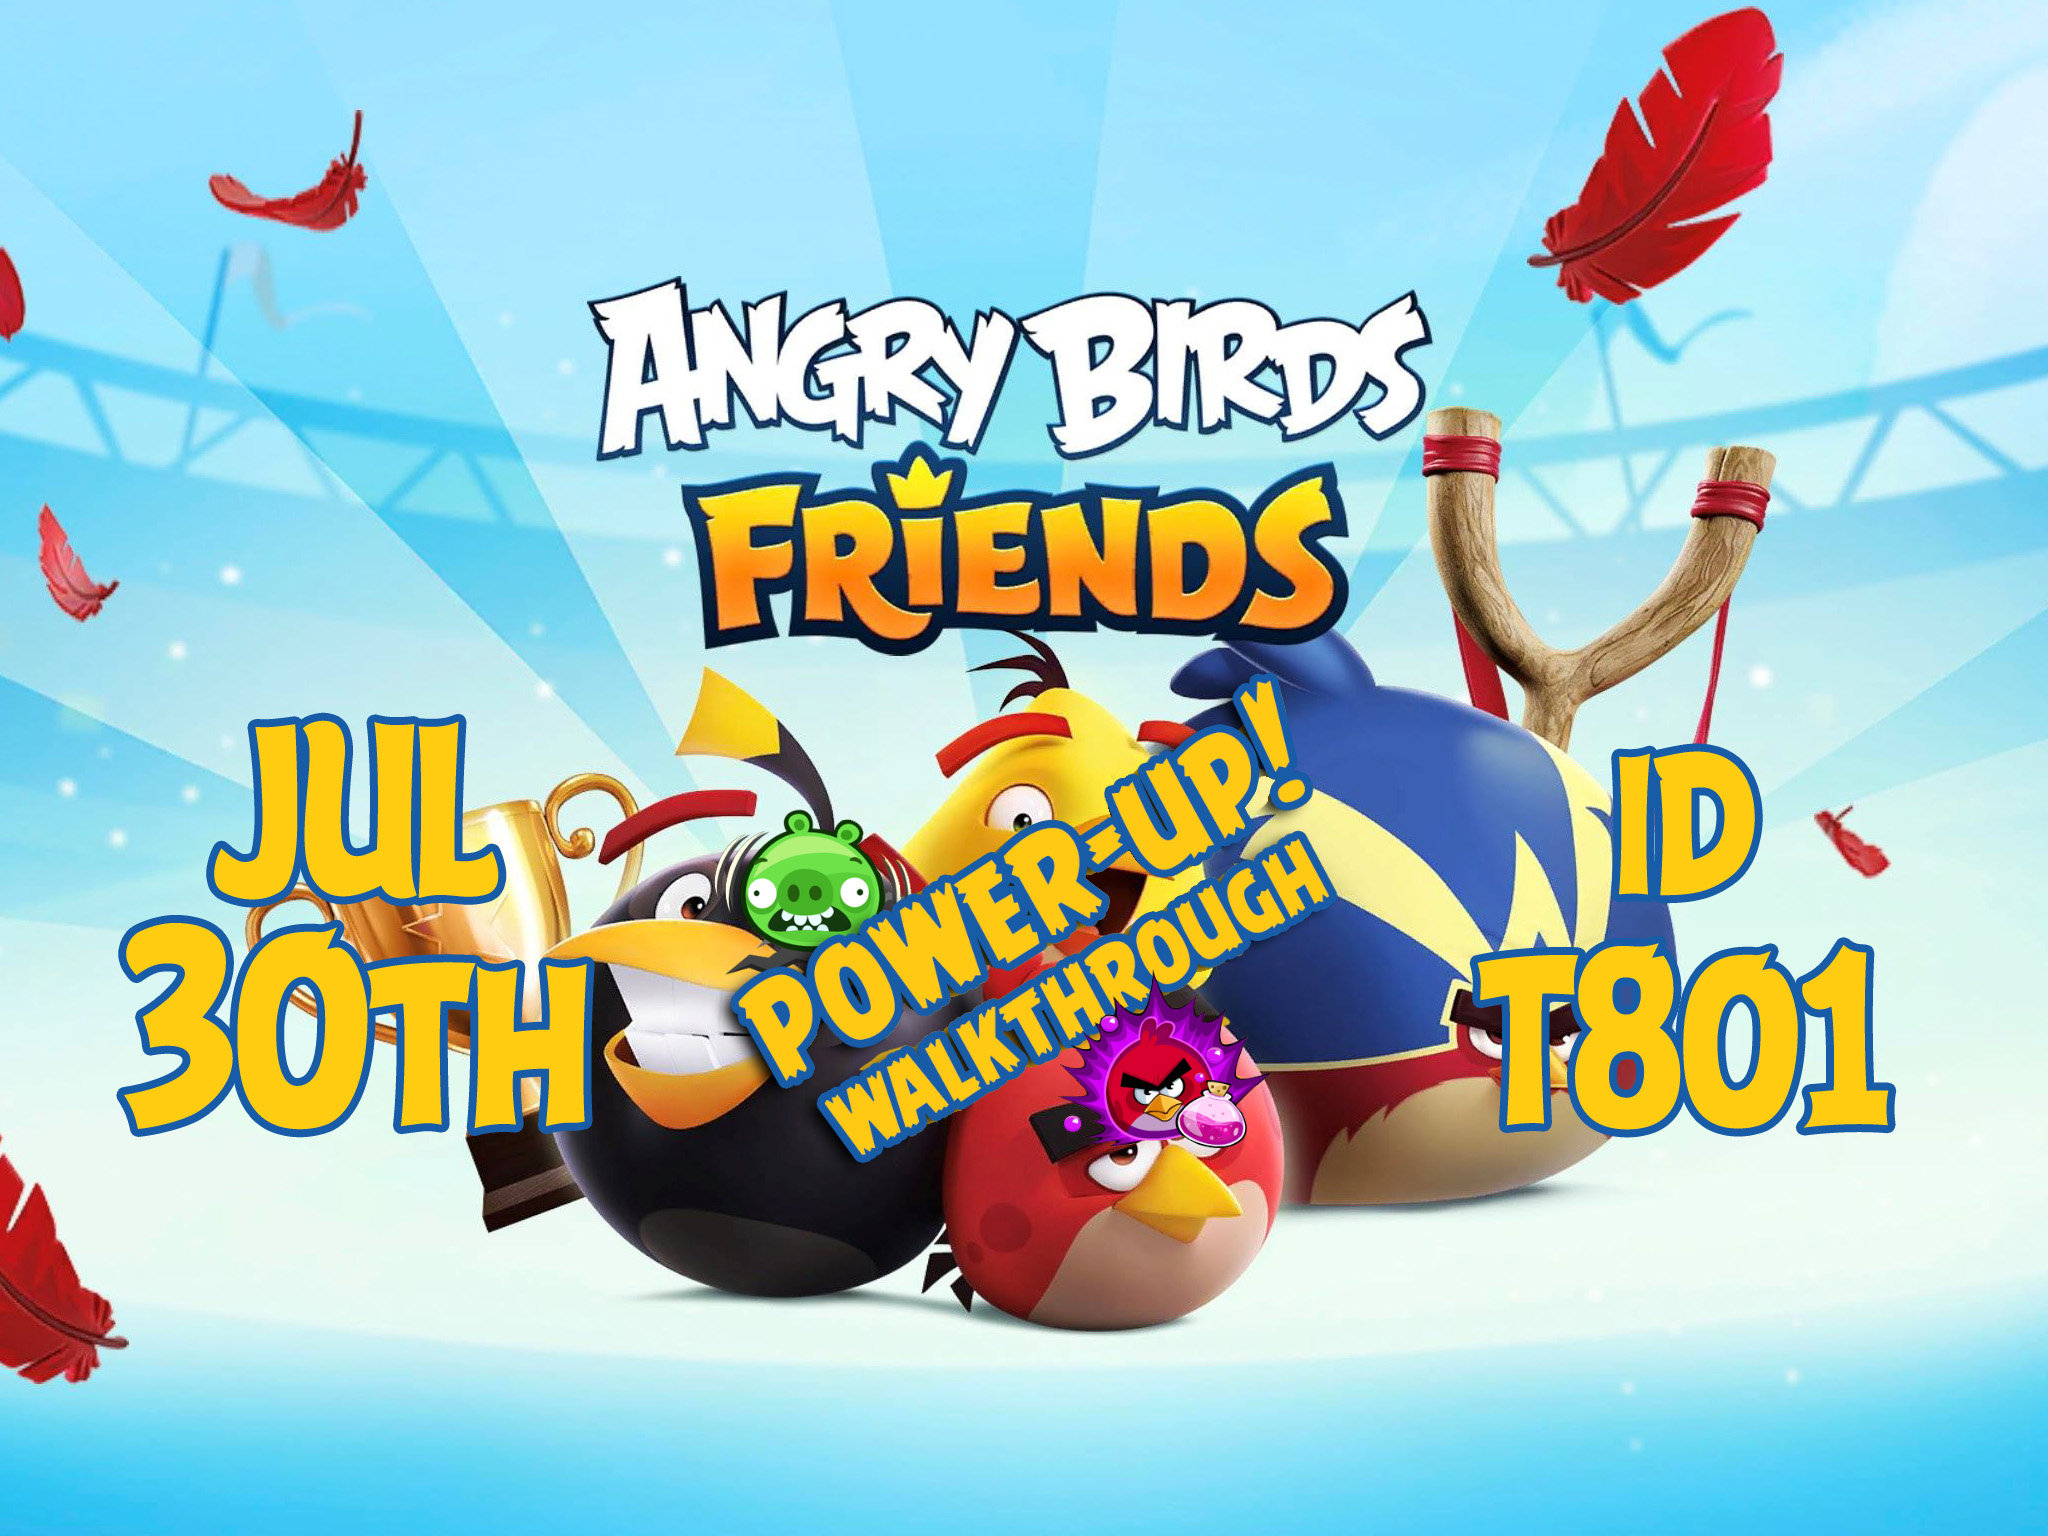 Angry-Birds-Friends-Tournament-T801-Feature-Image-PU